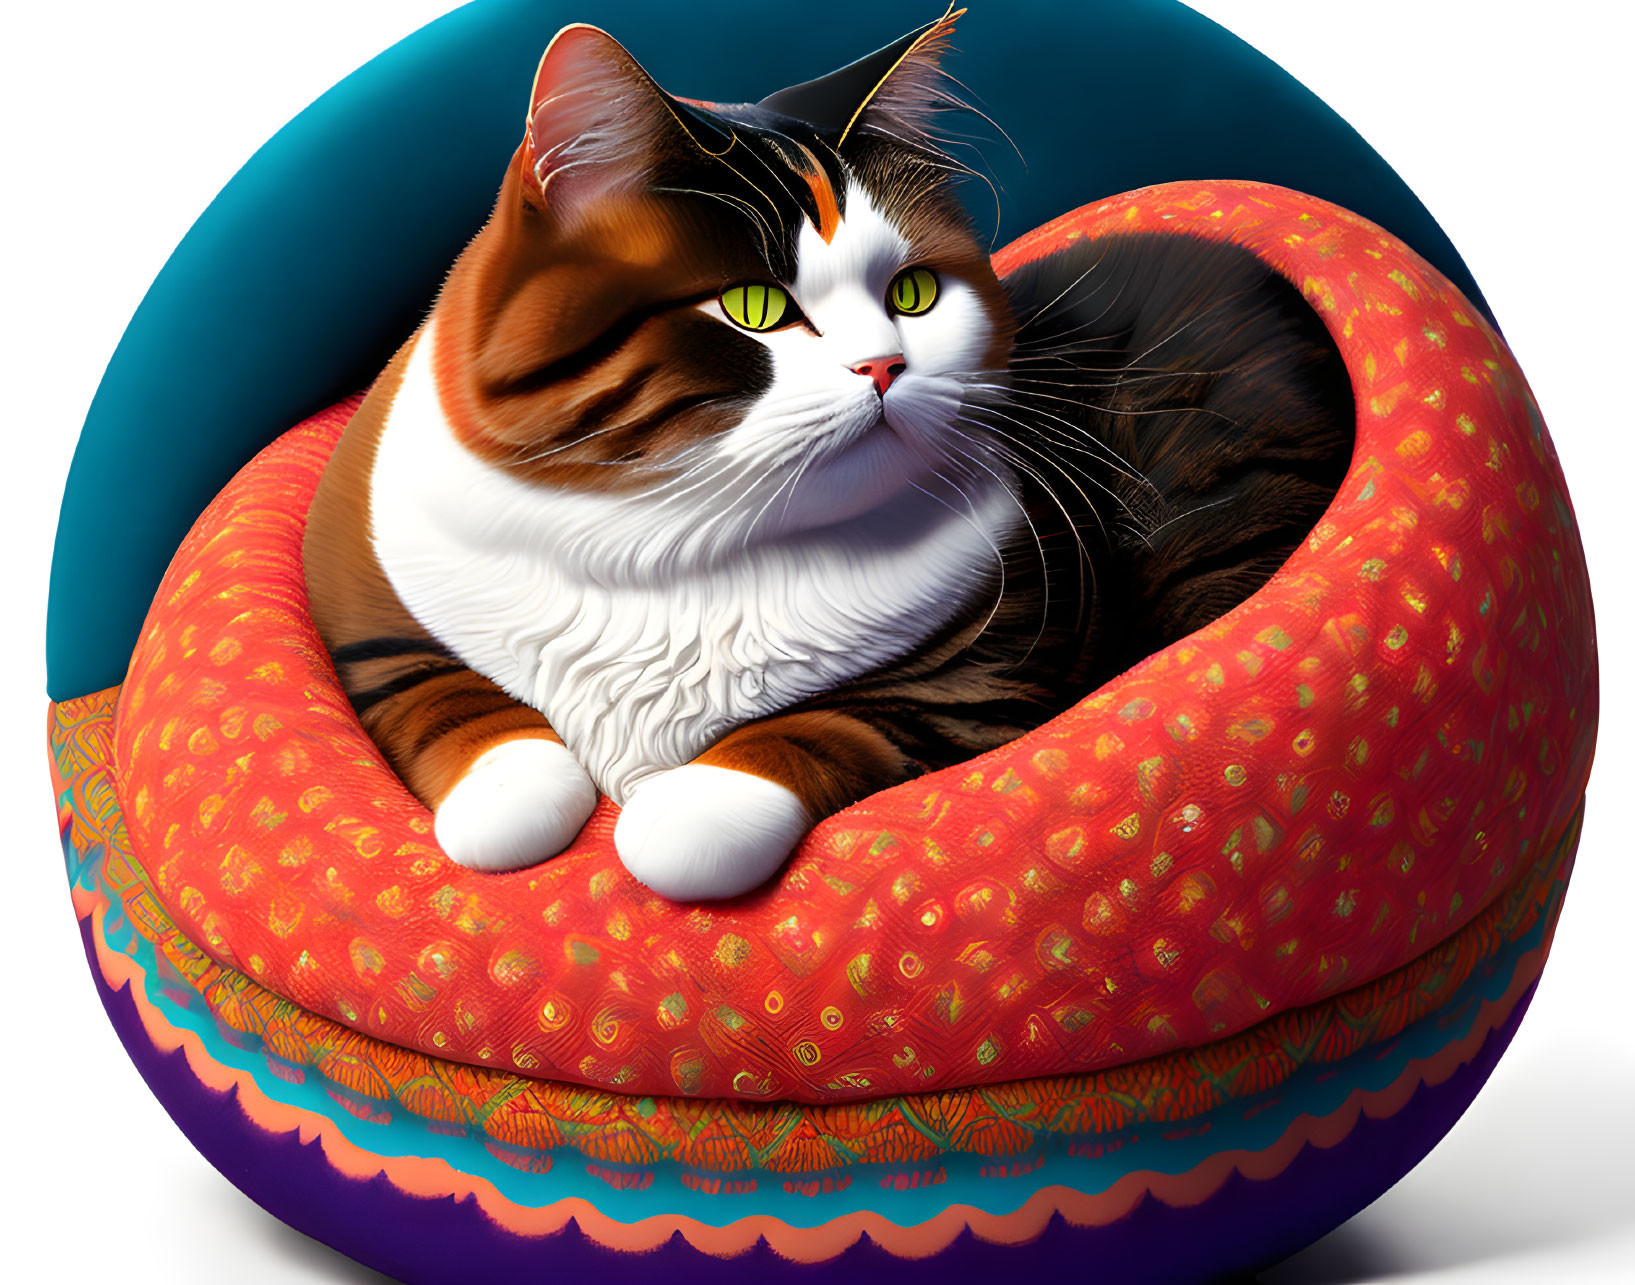 Calico Cat with Green Eyes in Circular Orange Bed